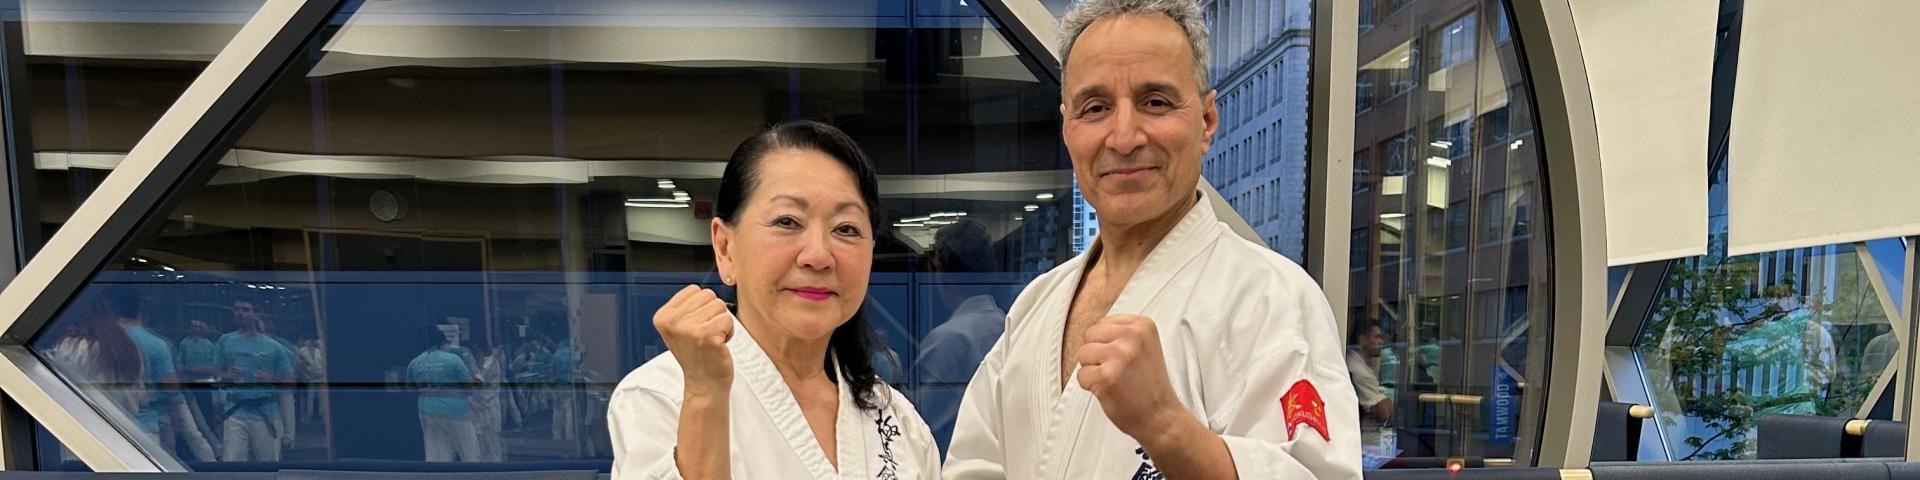 Pat and Hamid Asna-Ashari, one of Vancouver’s top Karate instructors, at the YWCA Health + Fitness Centre.